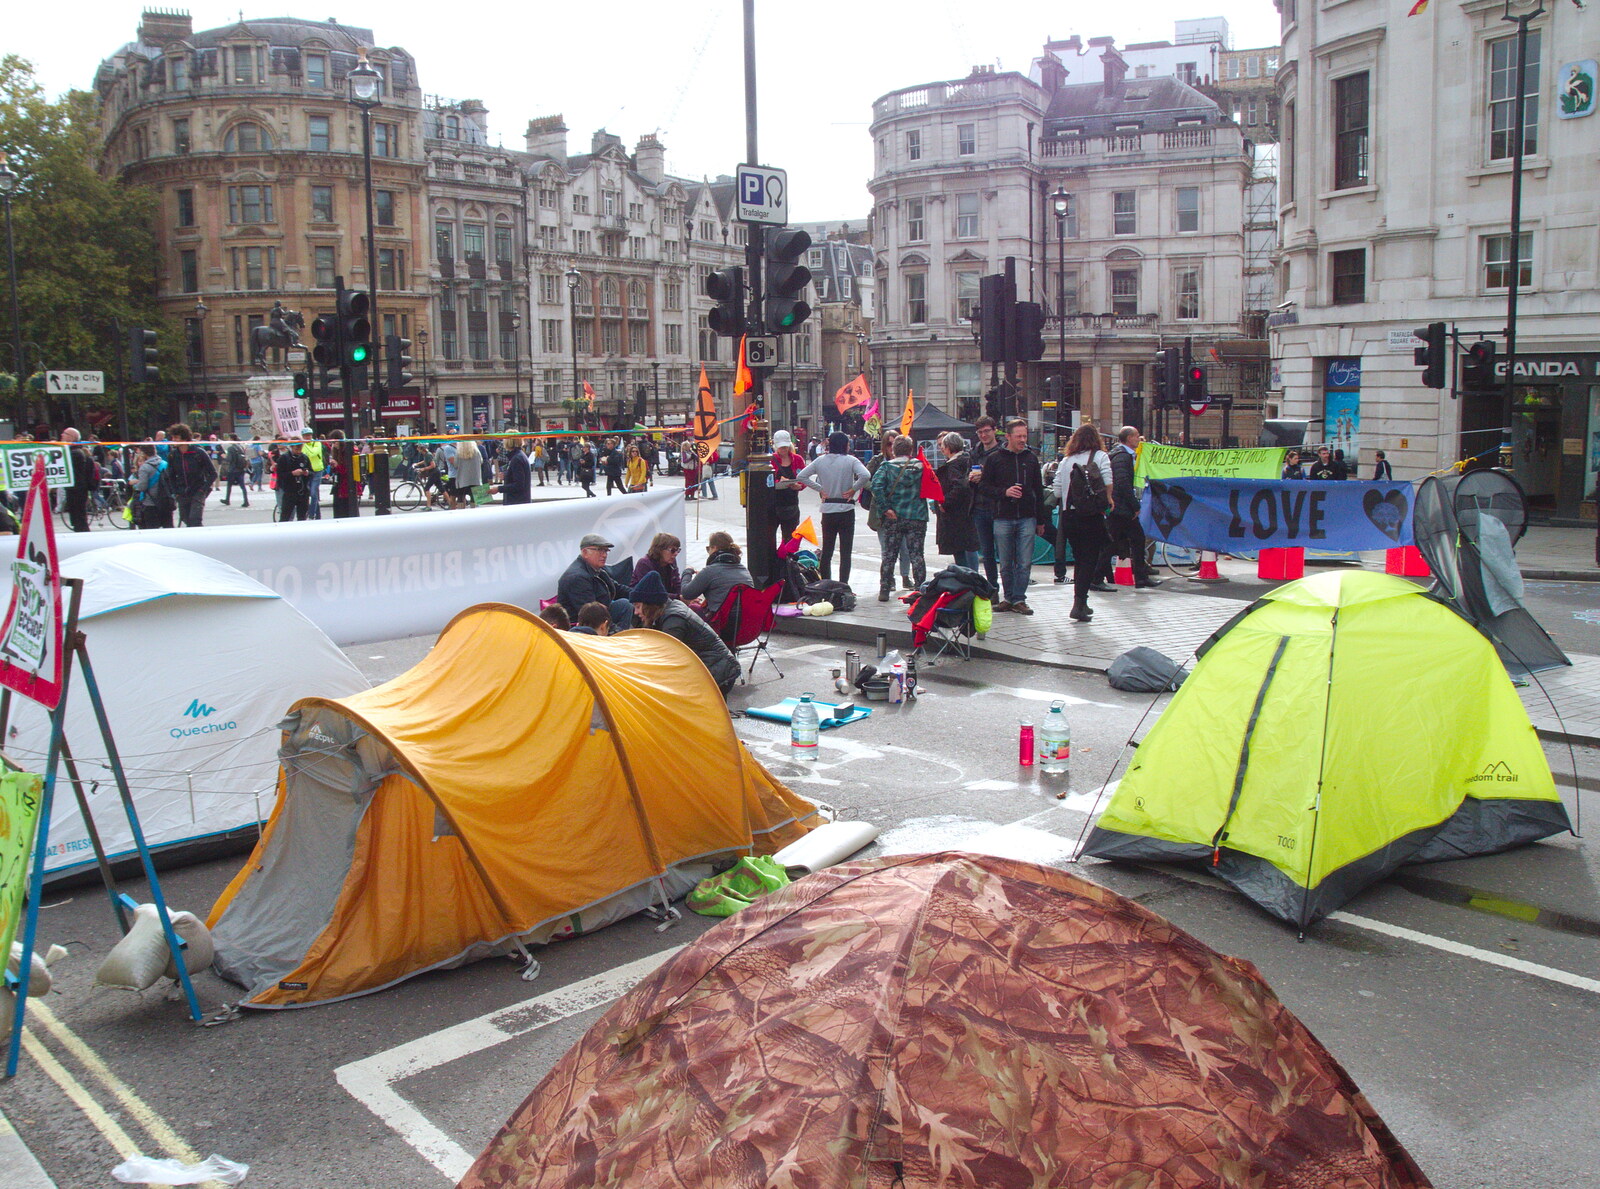 More tents in Trafalgar Square from The Extinction Rebellion Protest, Westminster, London - 9th October 2019